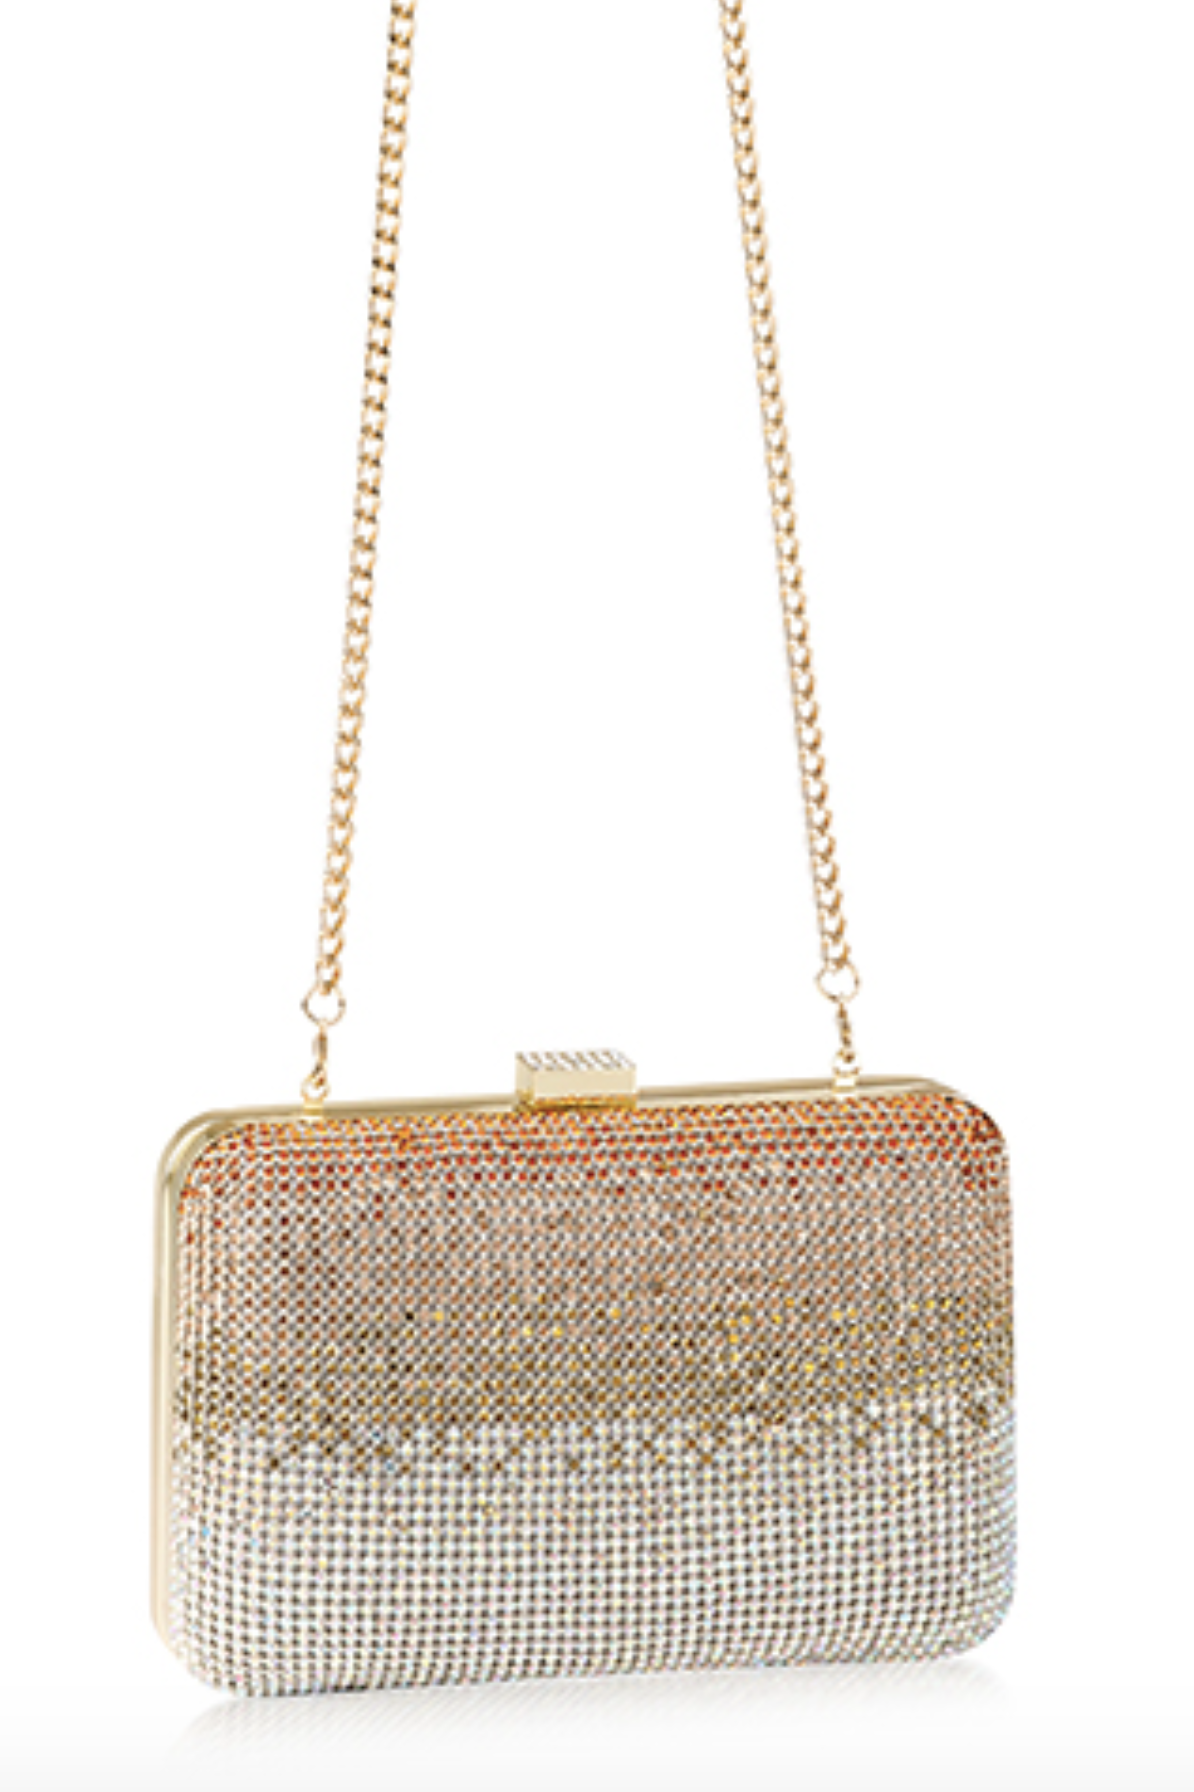 All Over Crystal Ombre Minaudiere by Whiting and Davis - RENTAL